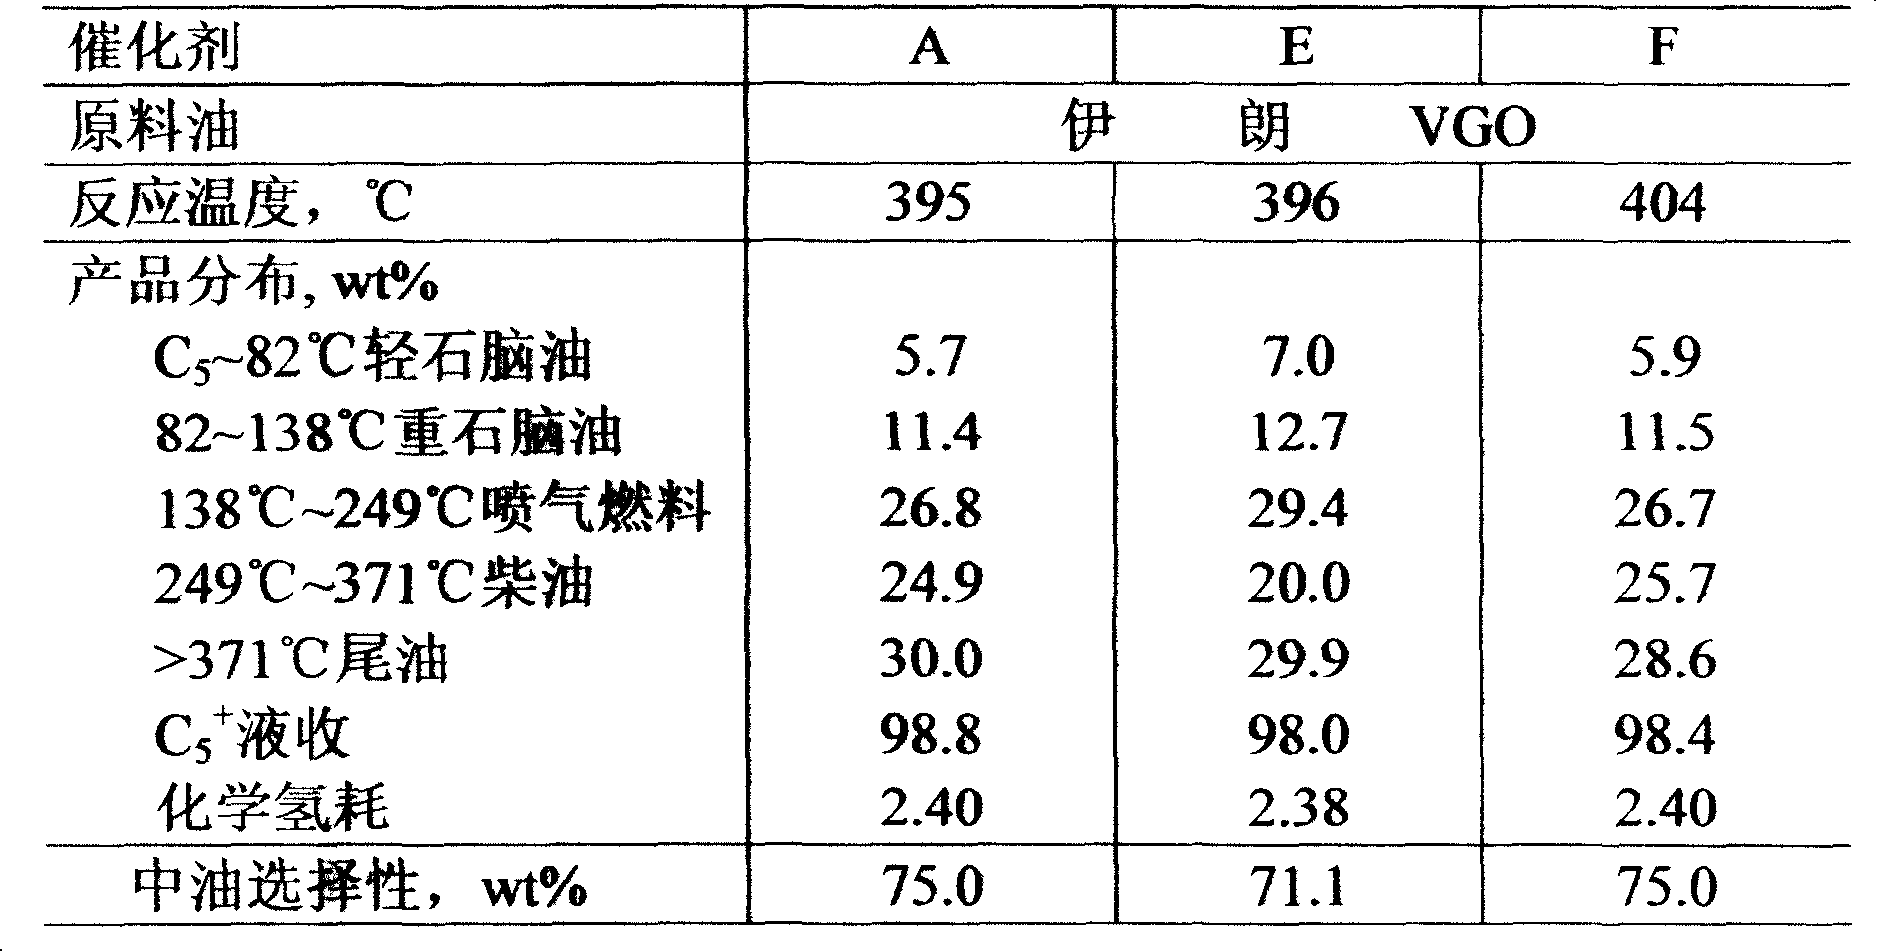 High active high medium oil selective hydrocracking catalyst and preparation thereof